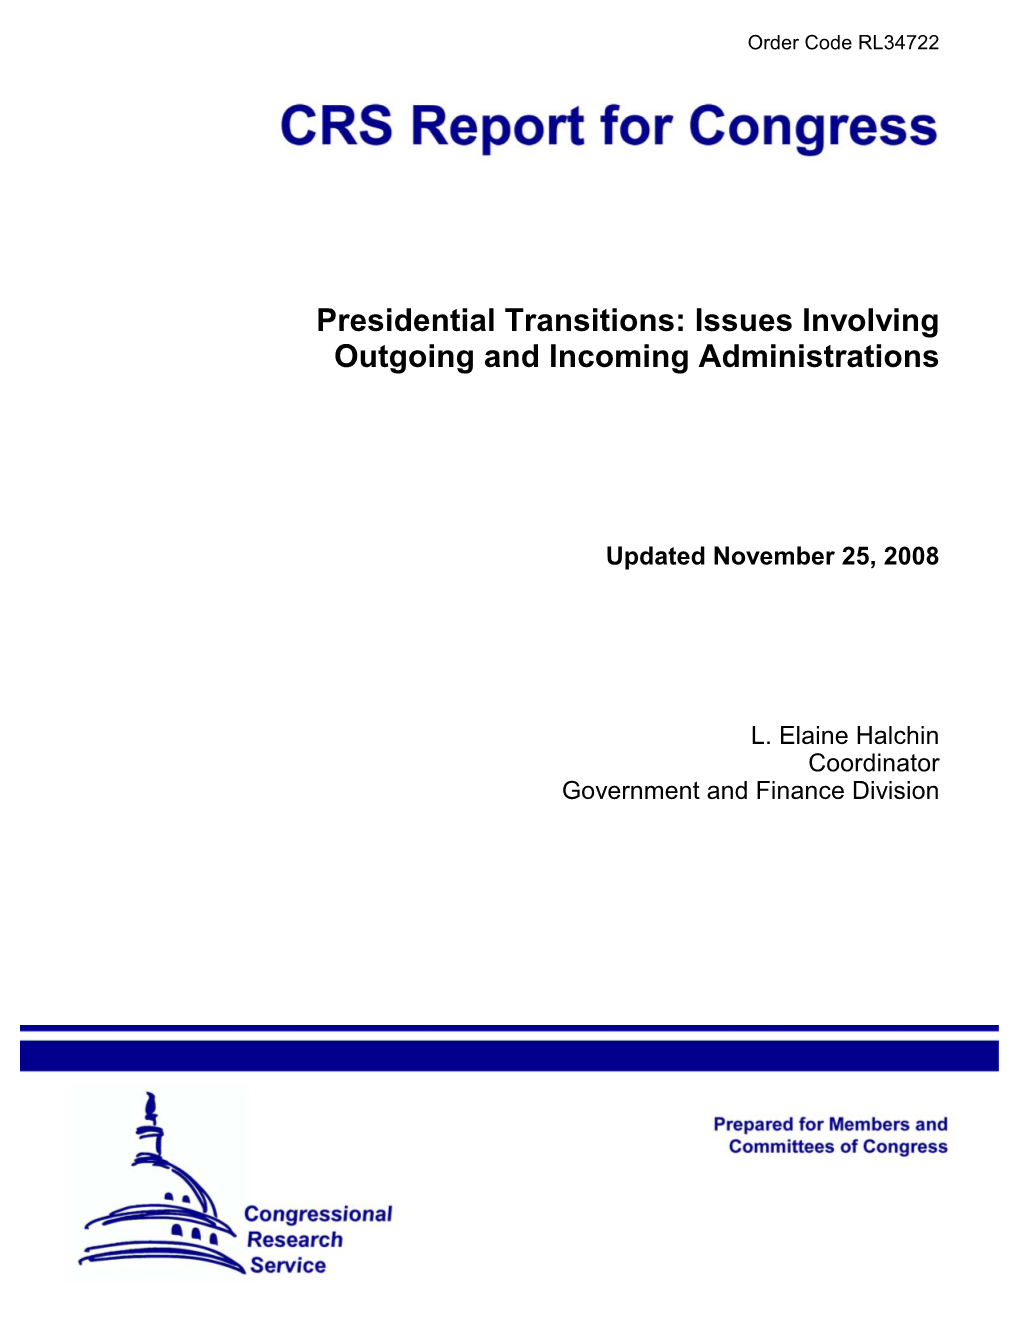 Presidential Transitions: Issues Involving Outgoing and Incoming Administrations